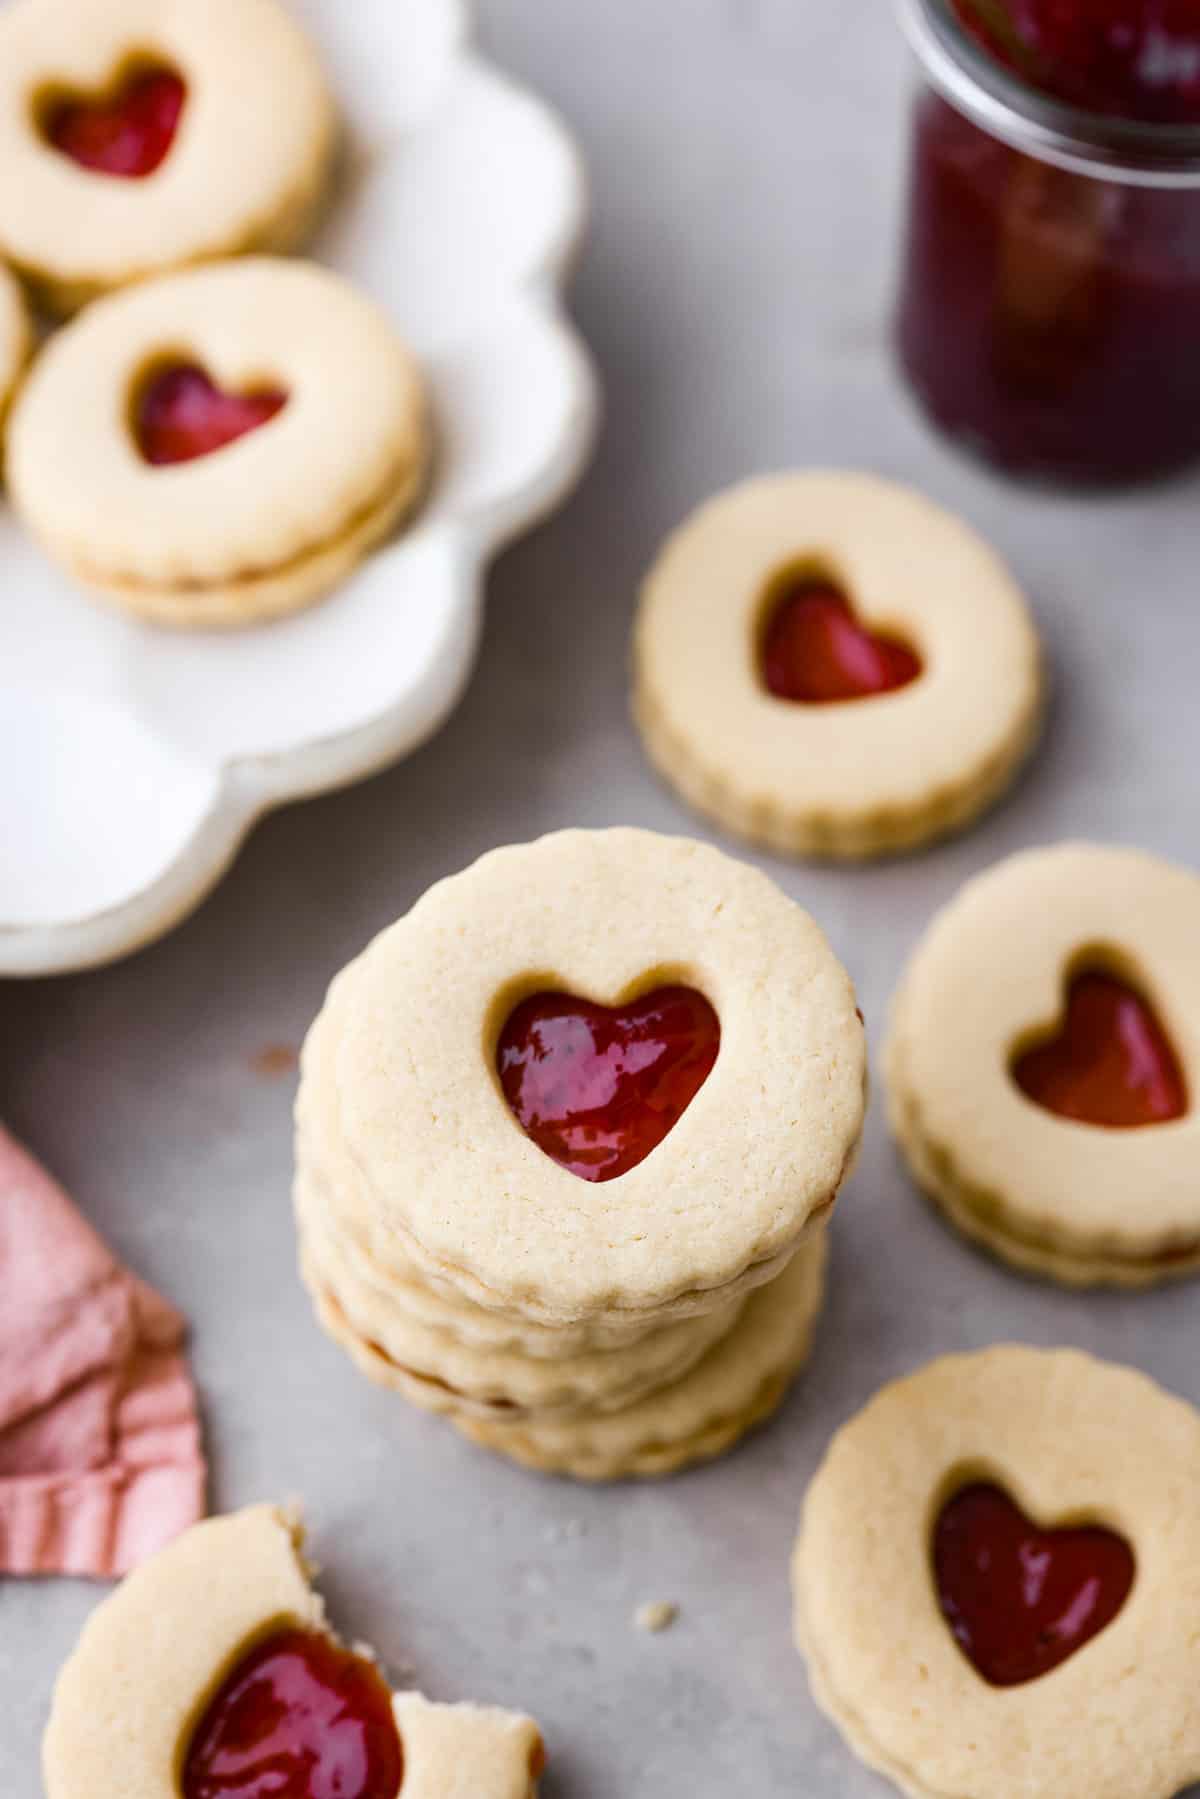 A stack of jam-filled shortbread cookies.